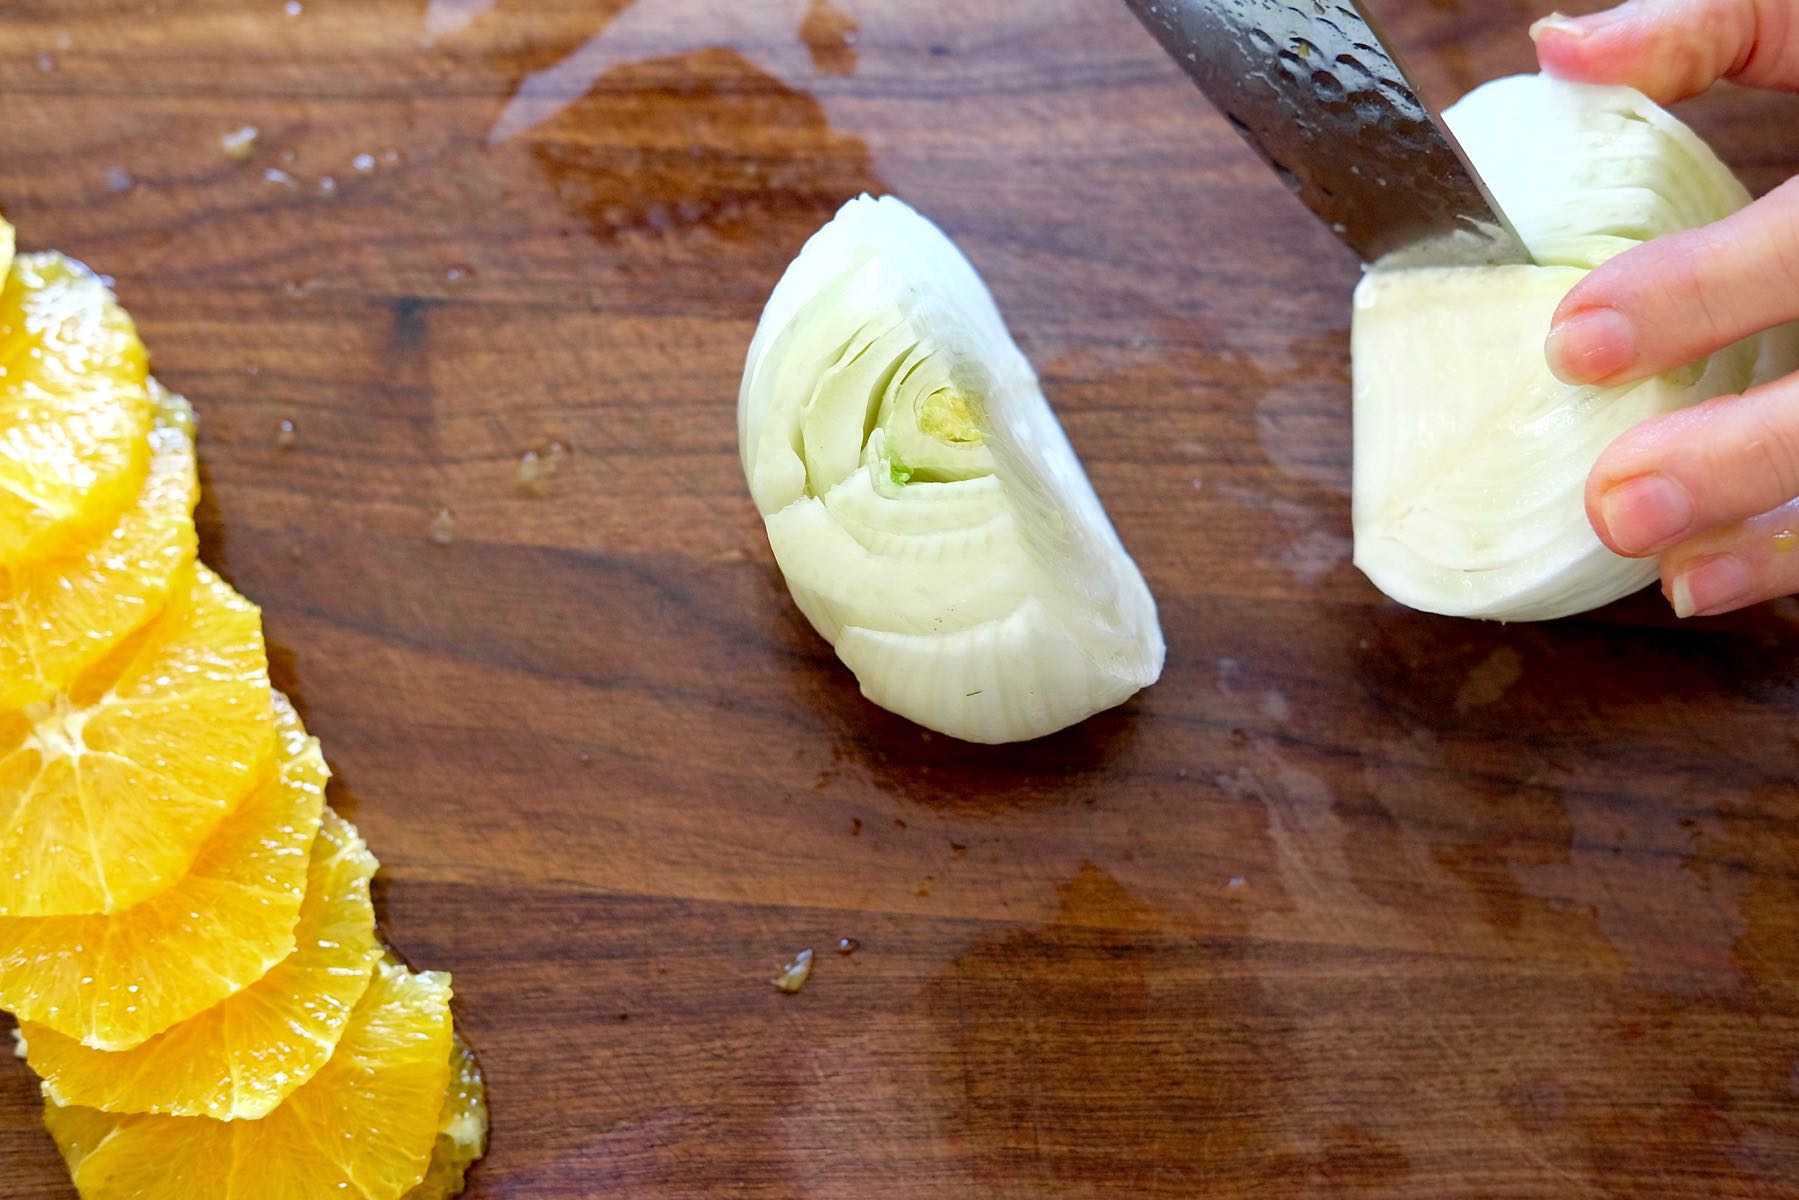 Coring the Fennel Bulb with sliced oranges off to the side of cutting board.